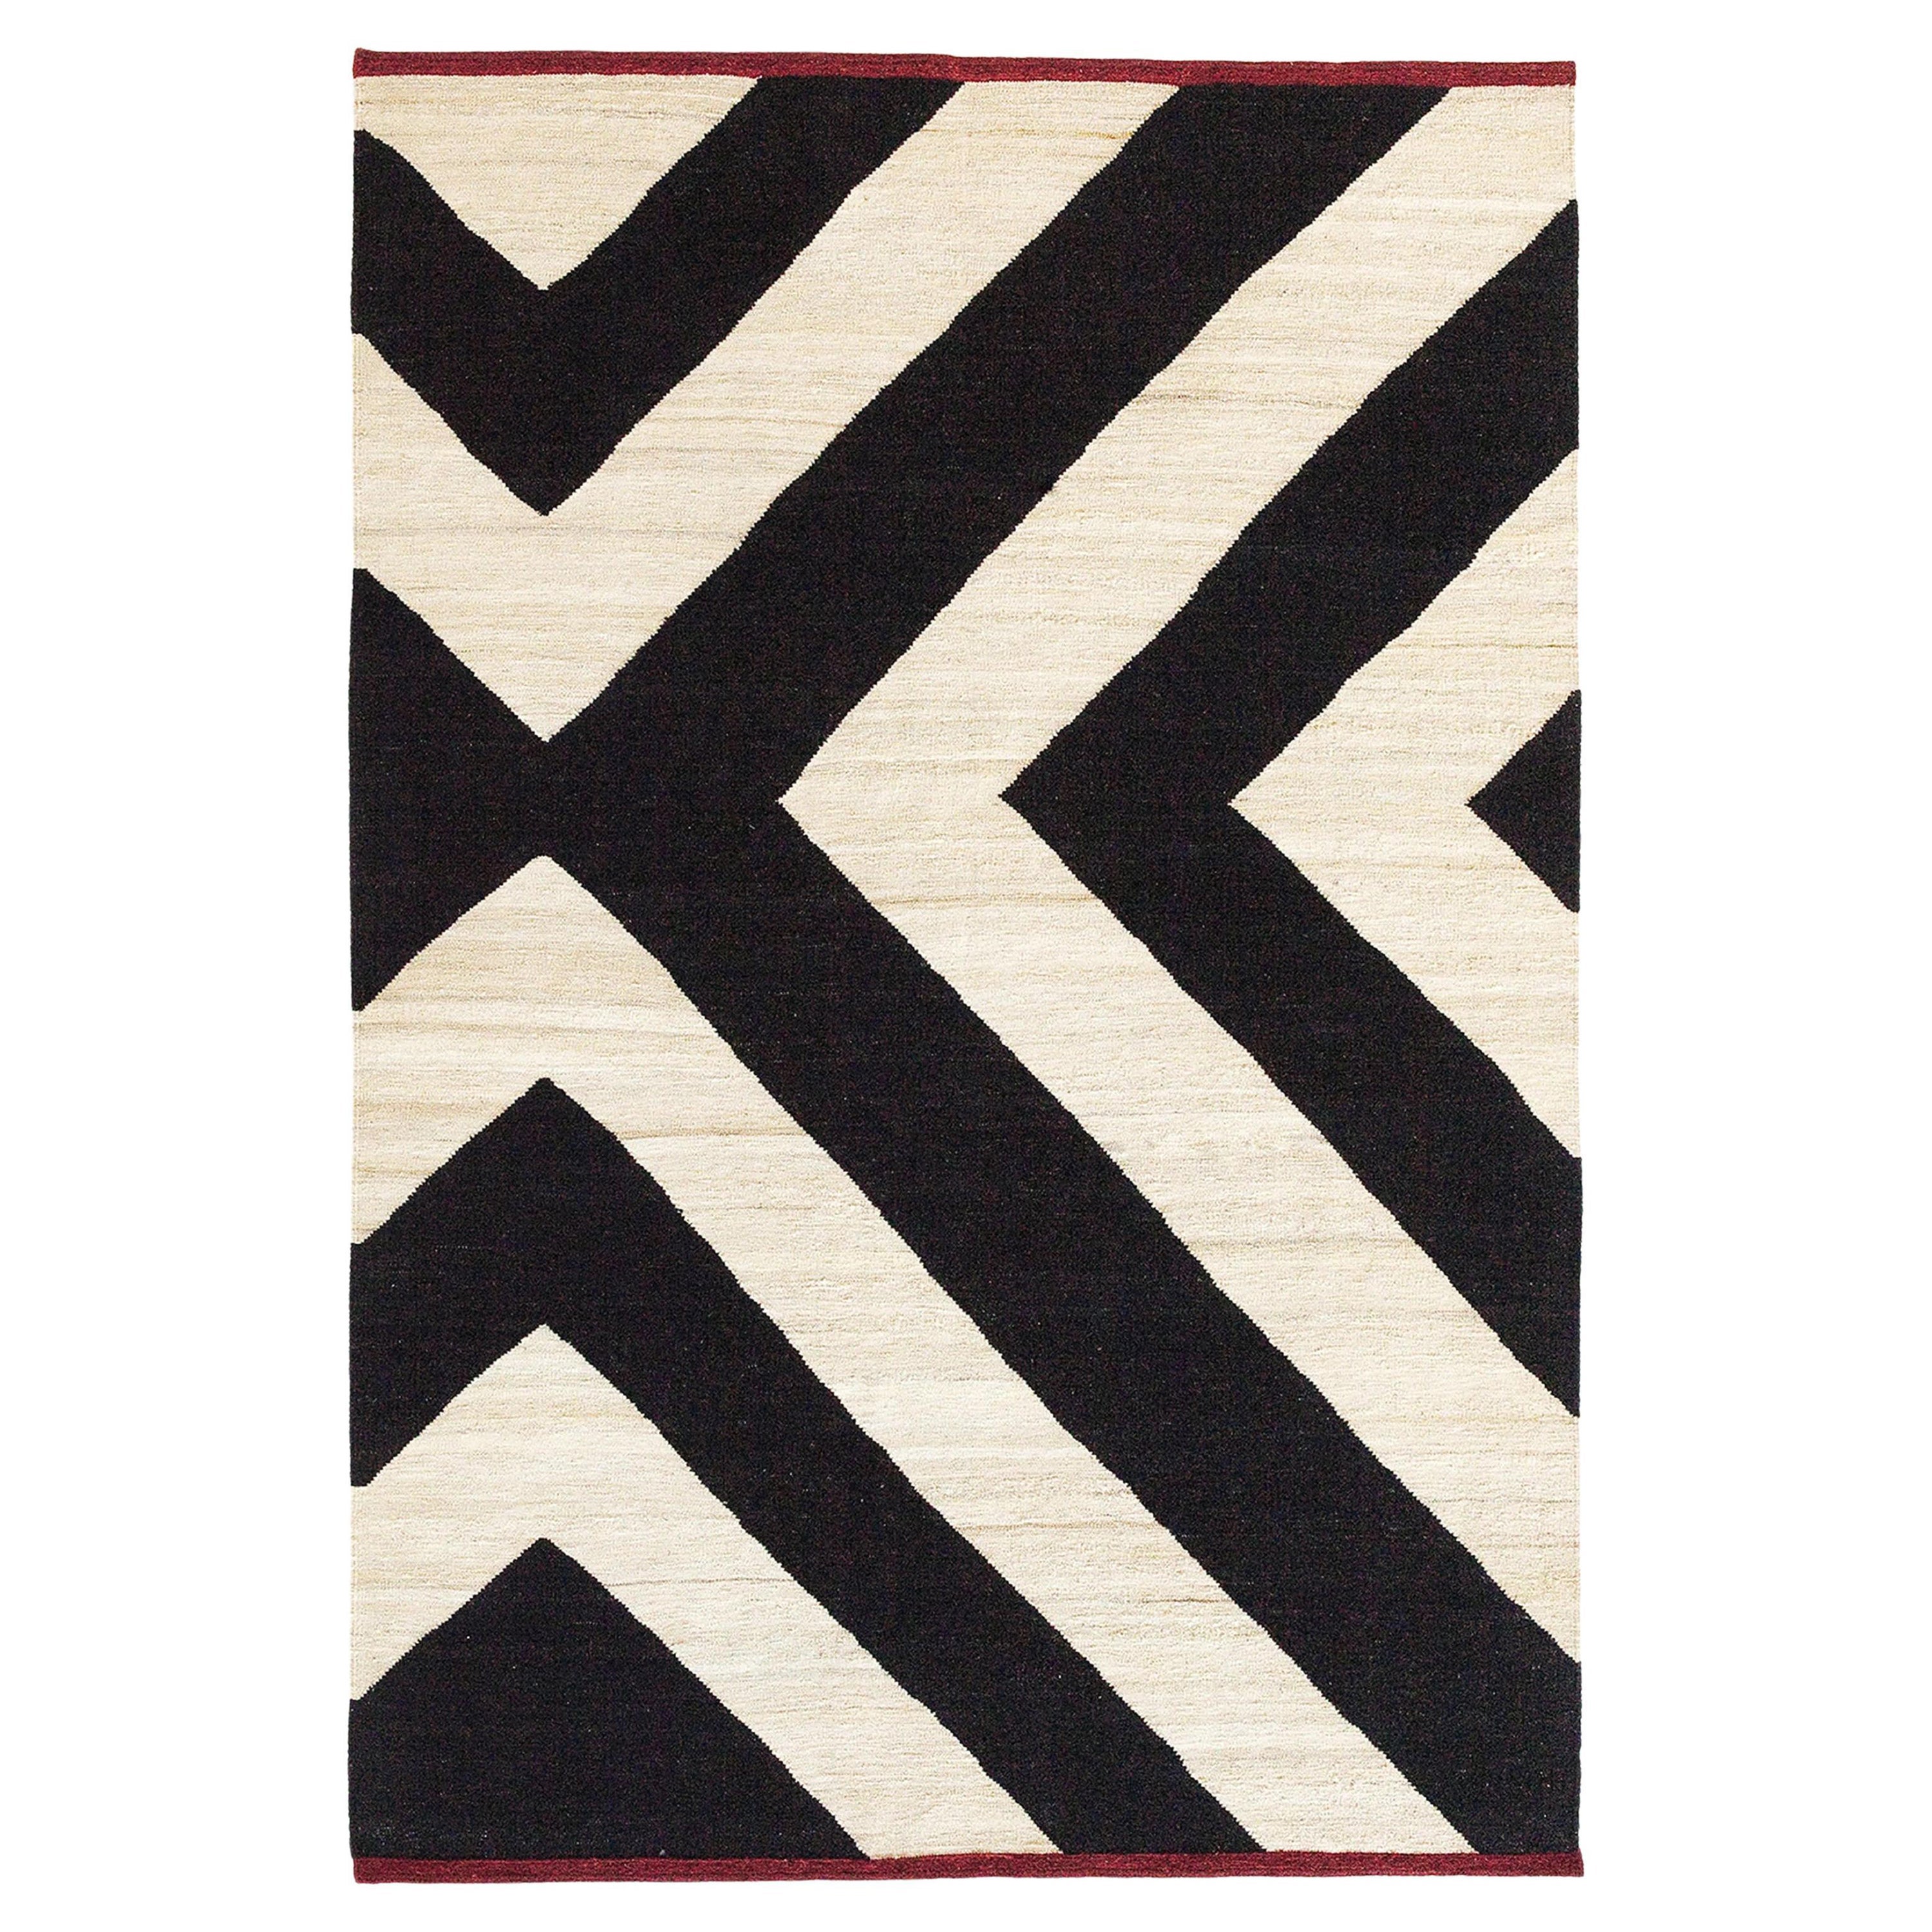 Large 'Mélange Zoom' Hand-Loomed Rug by Sybilla for Nanimarquina For Sale